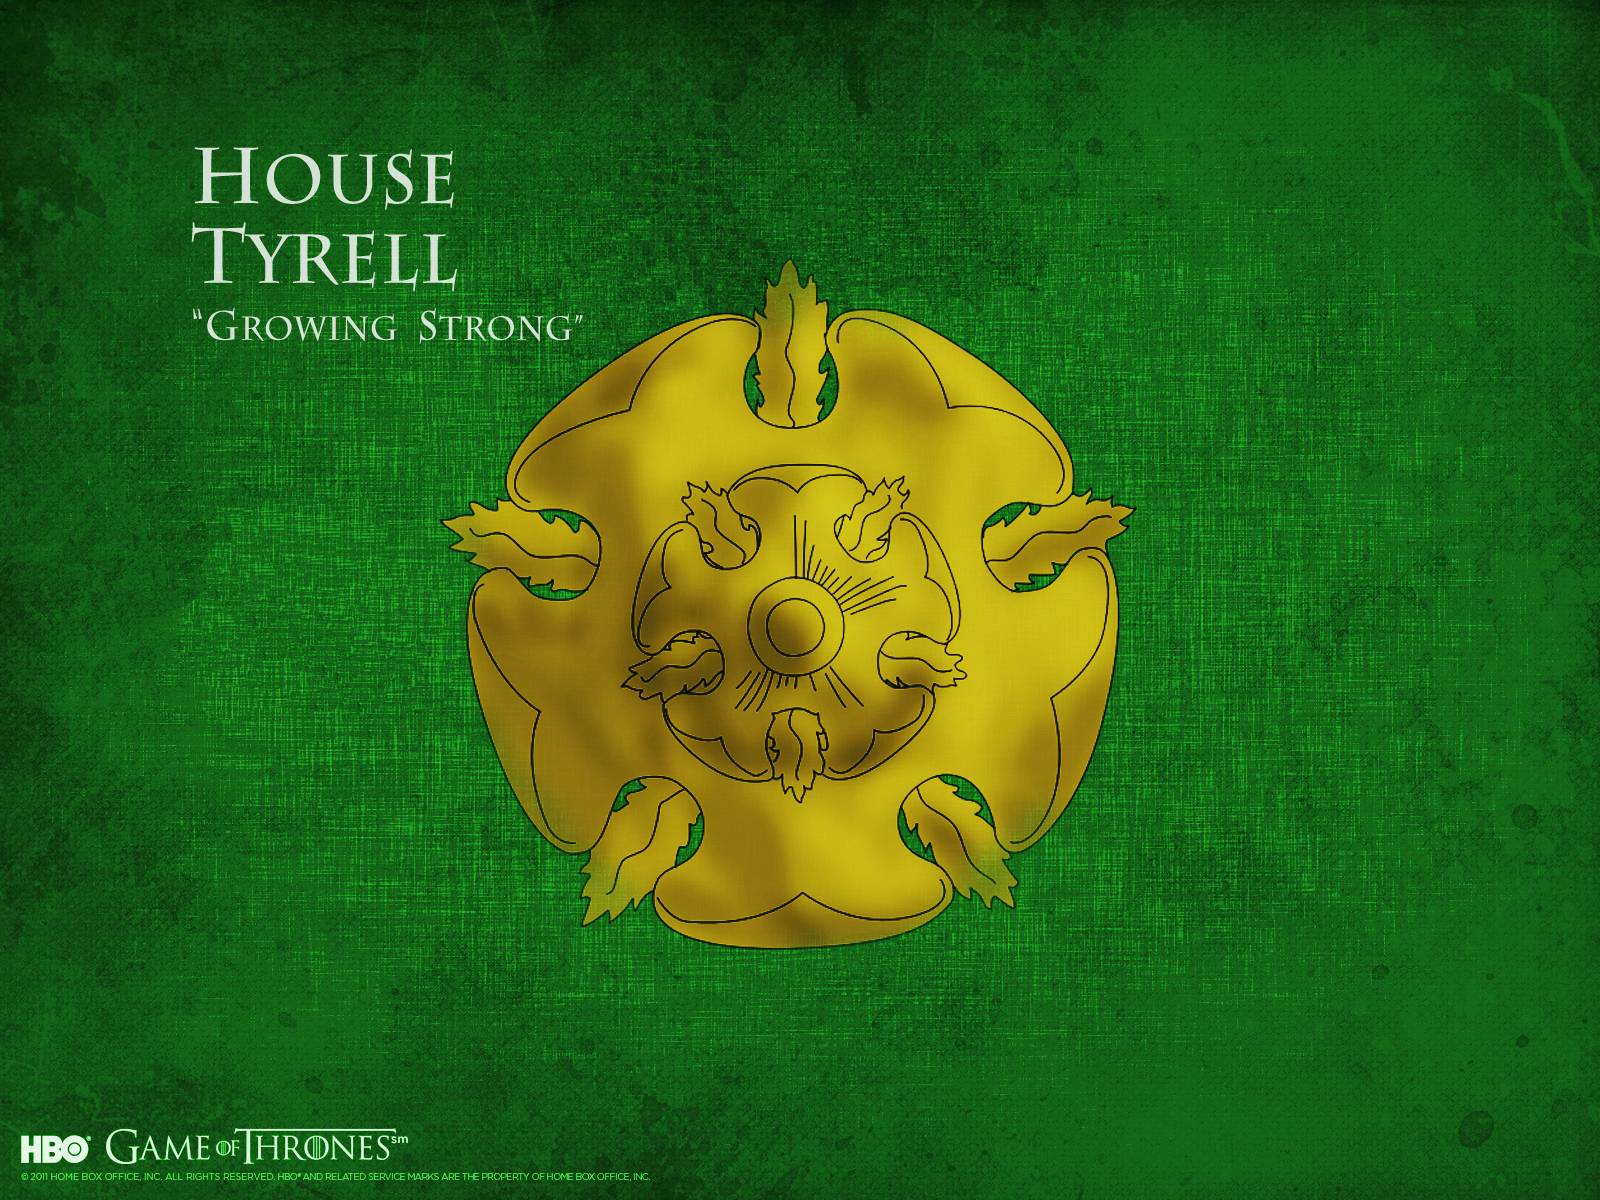 House Tyrell of Thrones Wallpaper